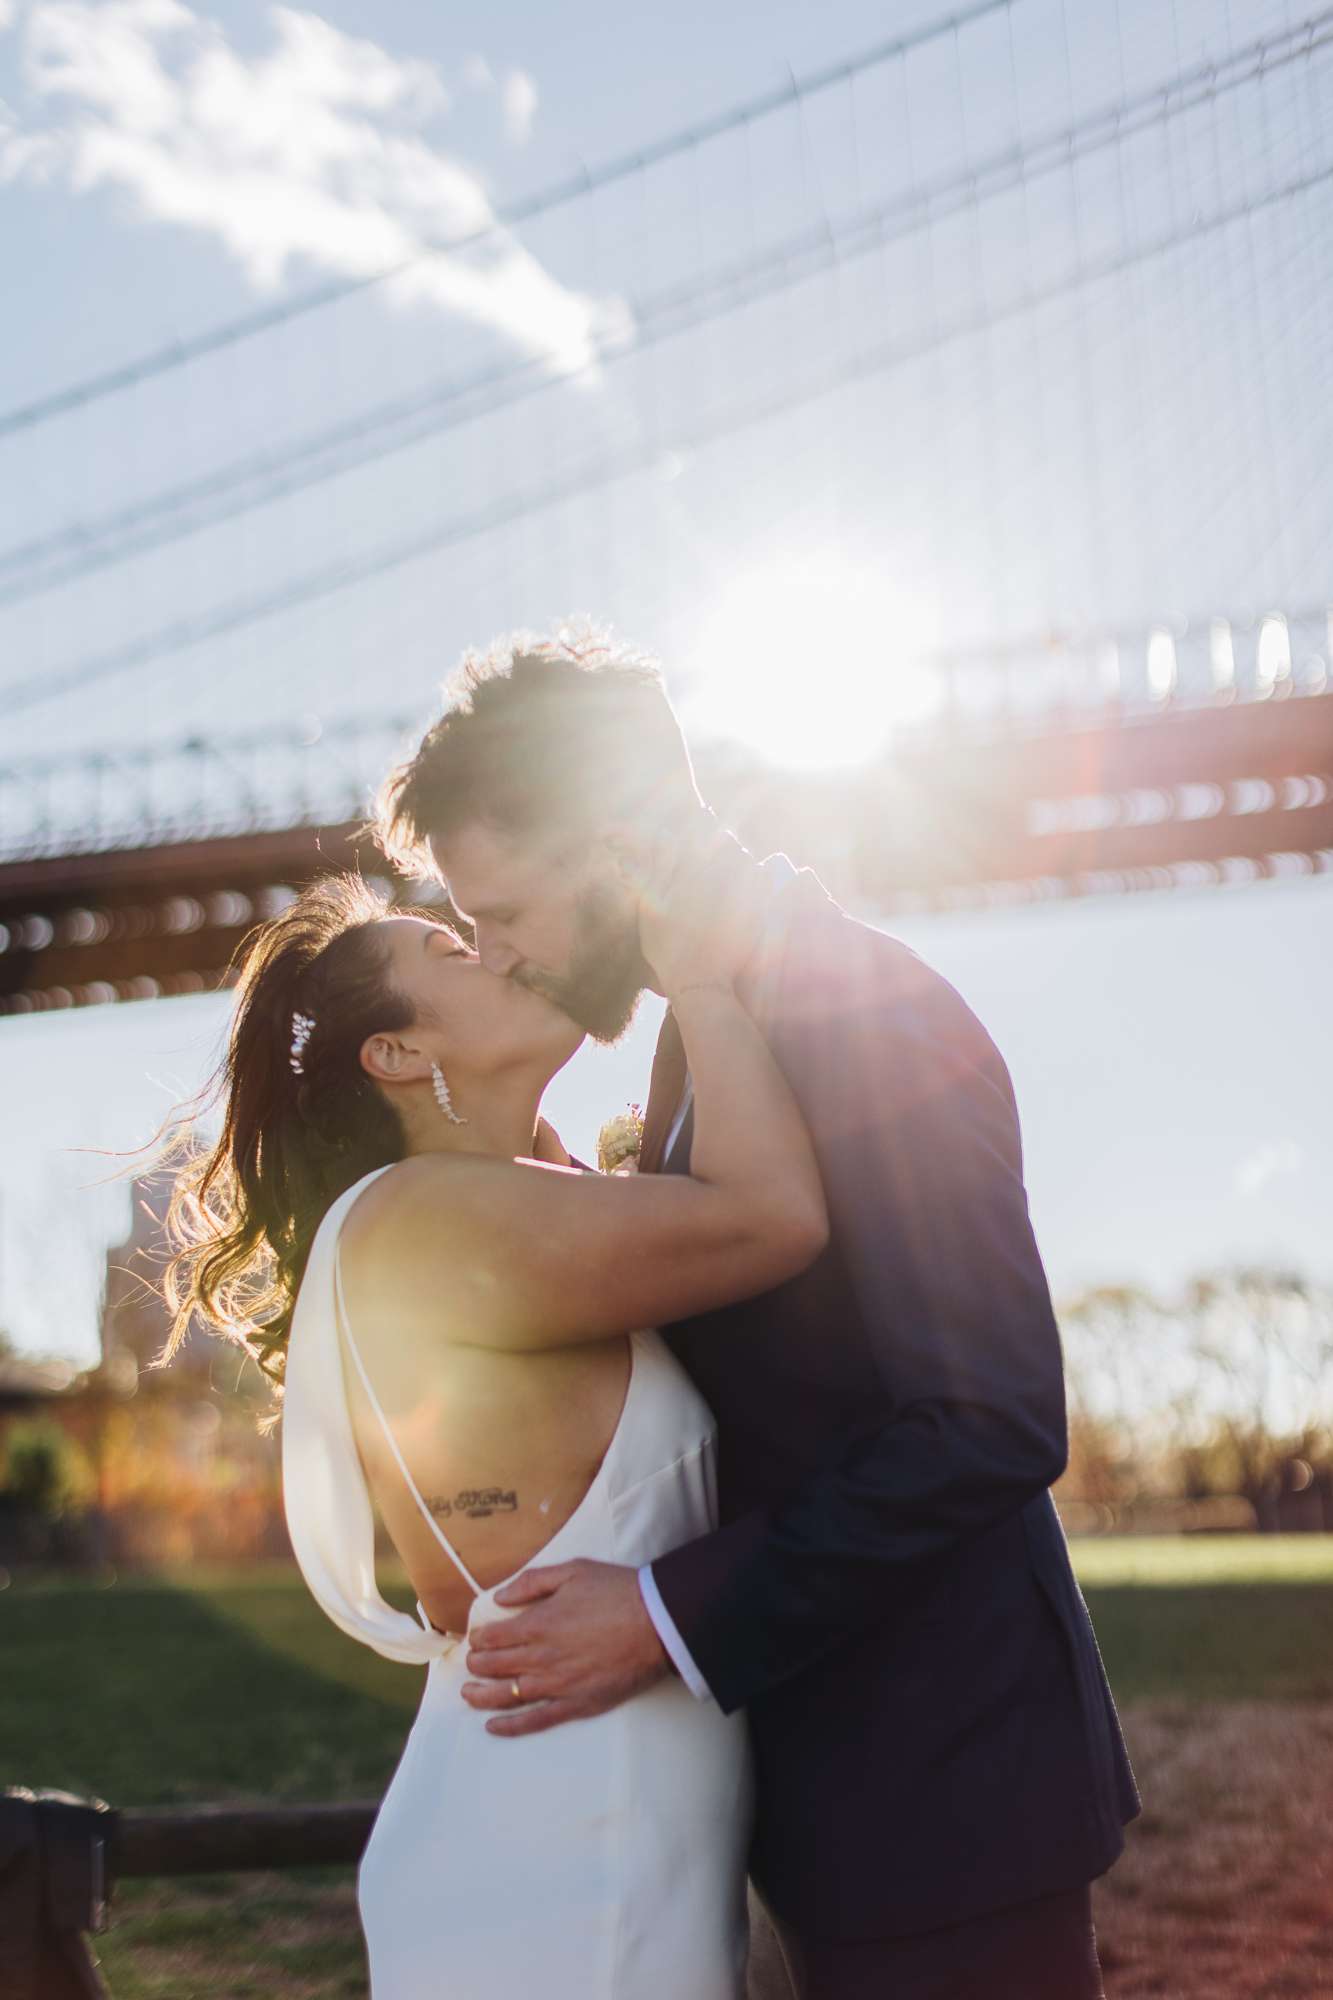 Small Fall DUMBO Elopement with New York views and foliage